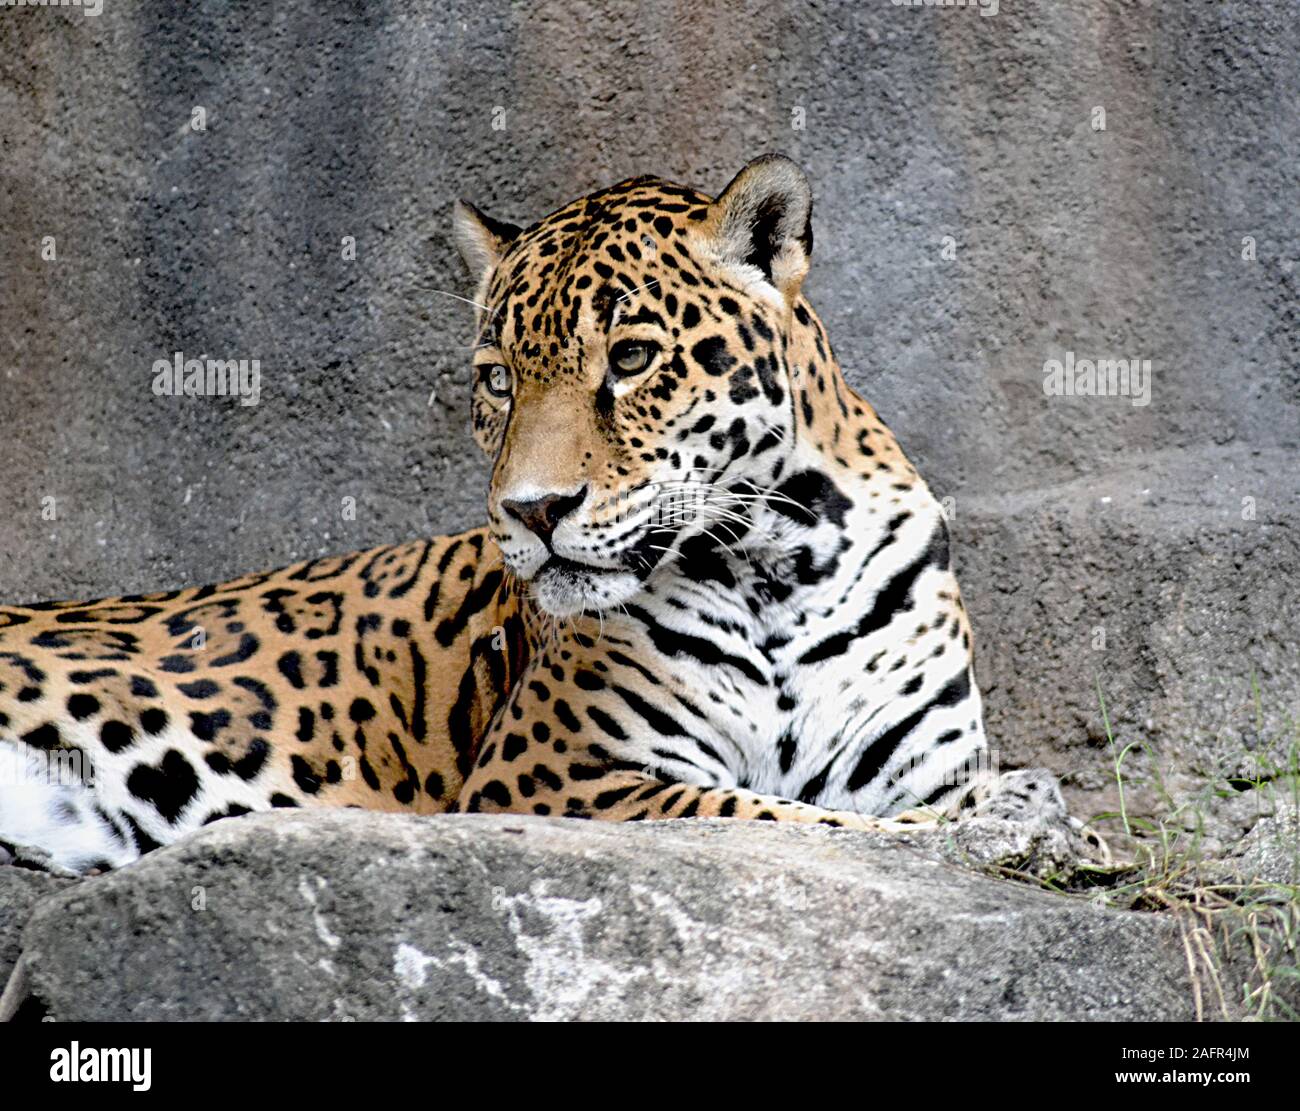 Leopard   Smiling Stock Photo